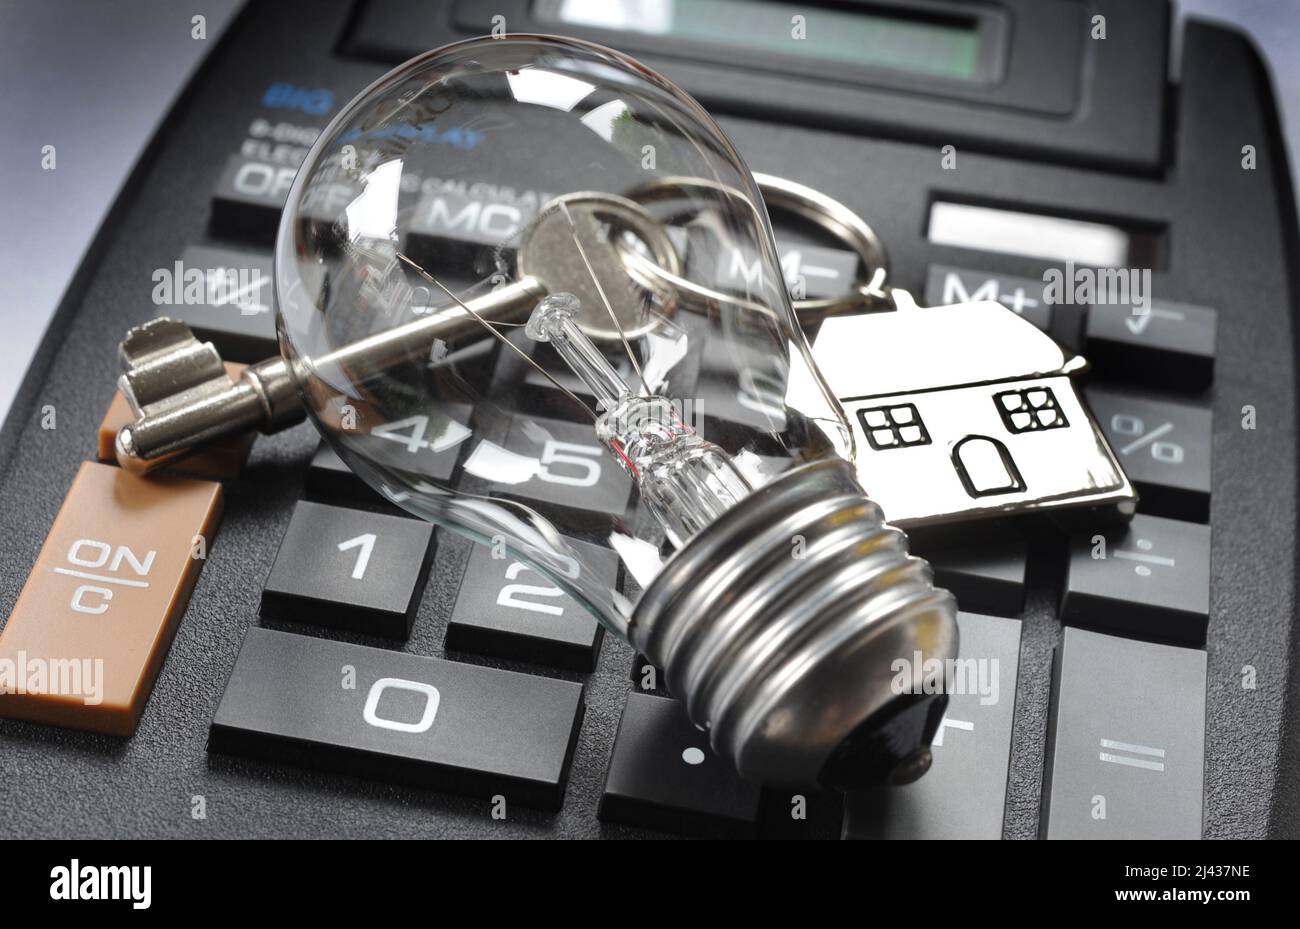 HOUSE KEY AND KEY RING WITH LIGHT BULB ON CALCULATOR RE THE COST OF LIVING ELECTRICITY RISING PRICES HOUSEHOLD  BILLS ELECTRIC UK Stock Photo